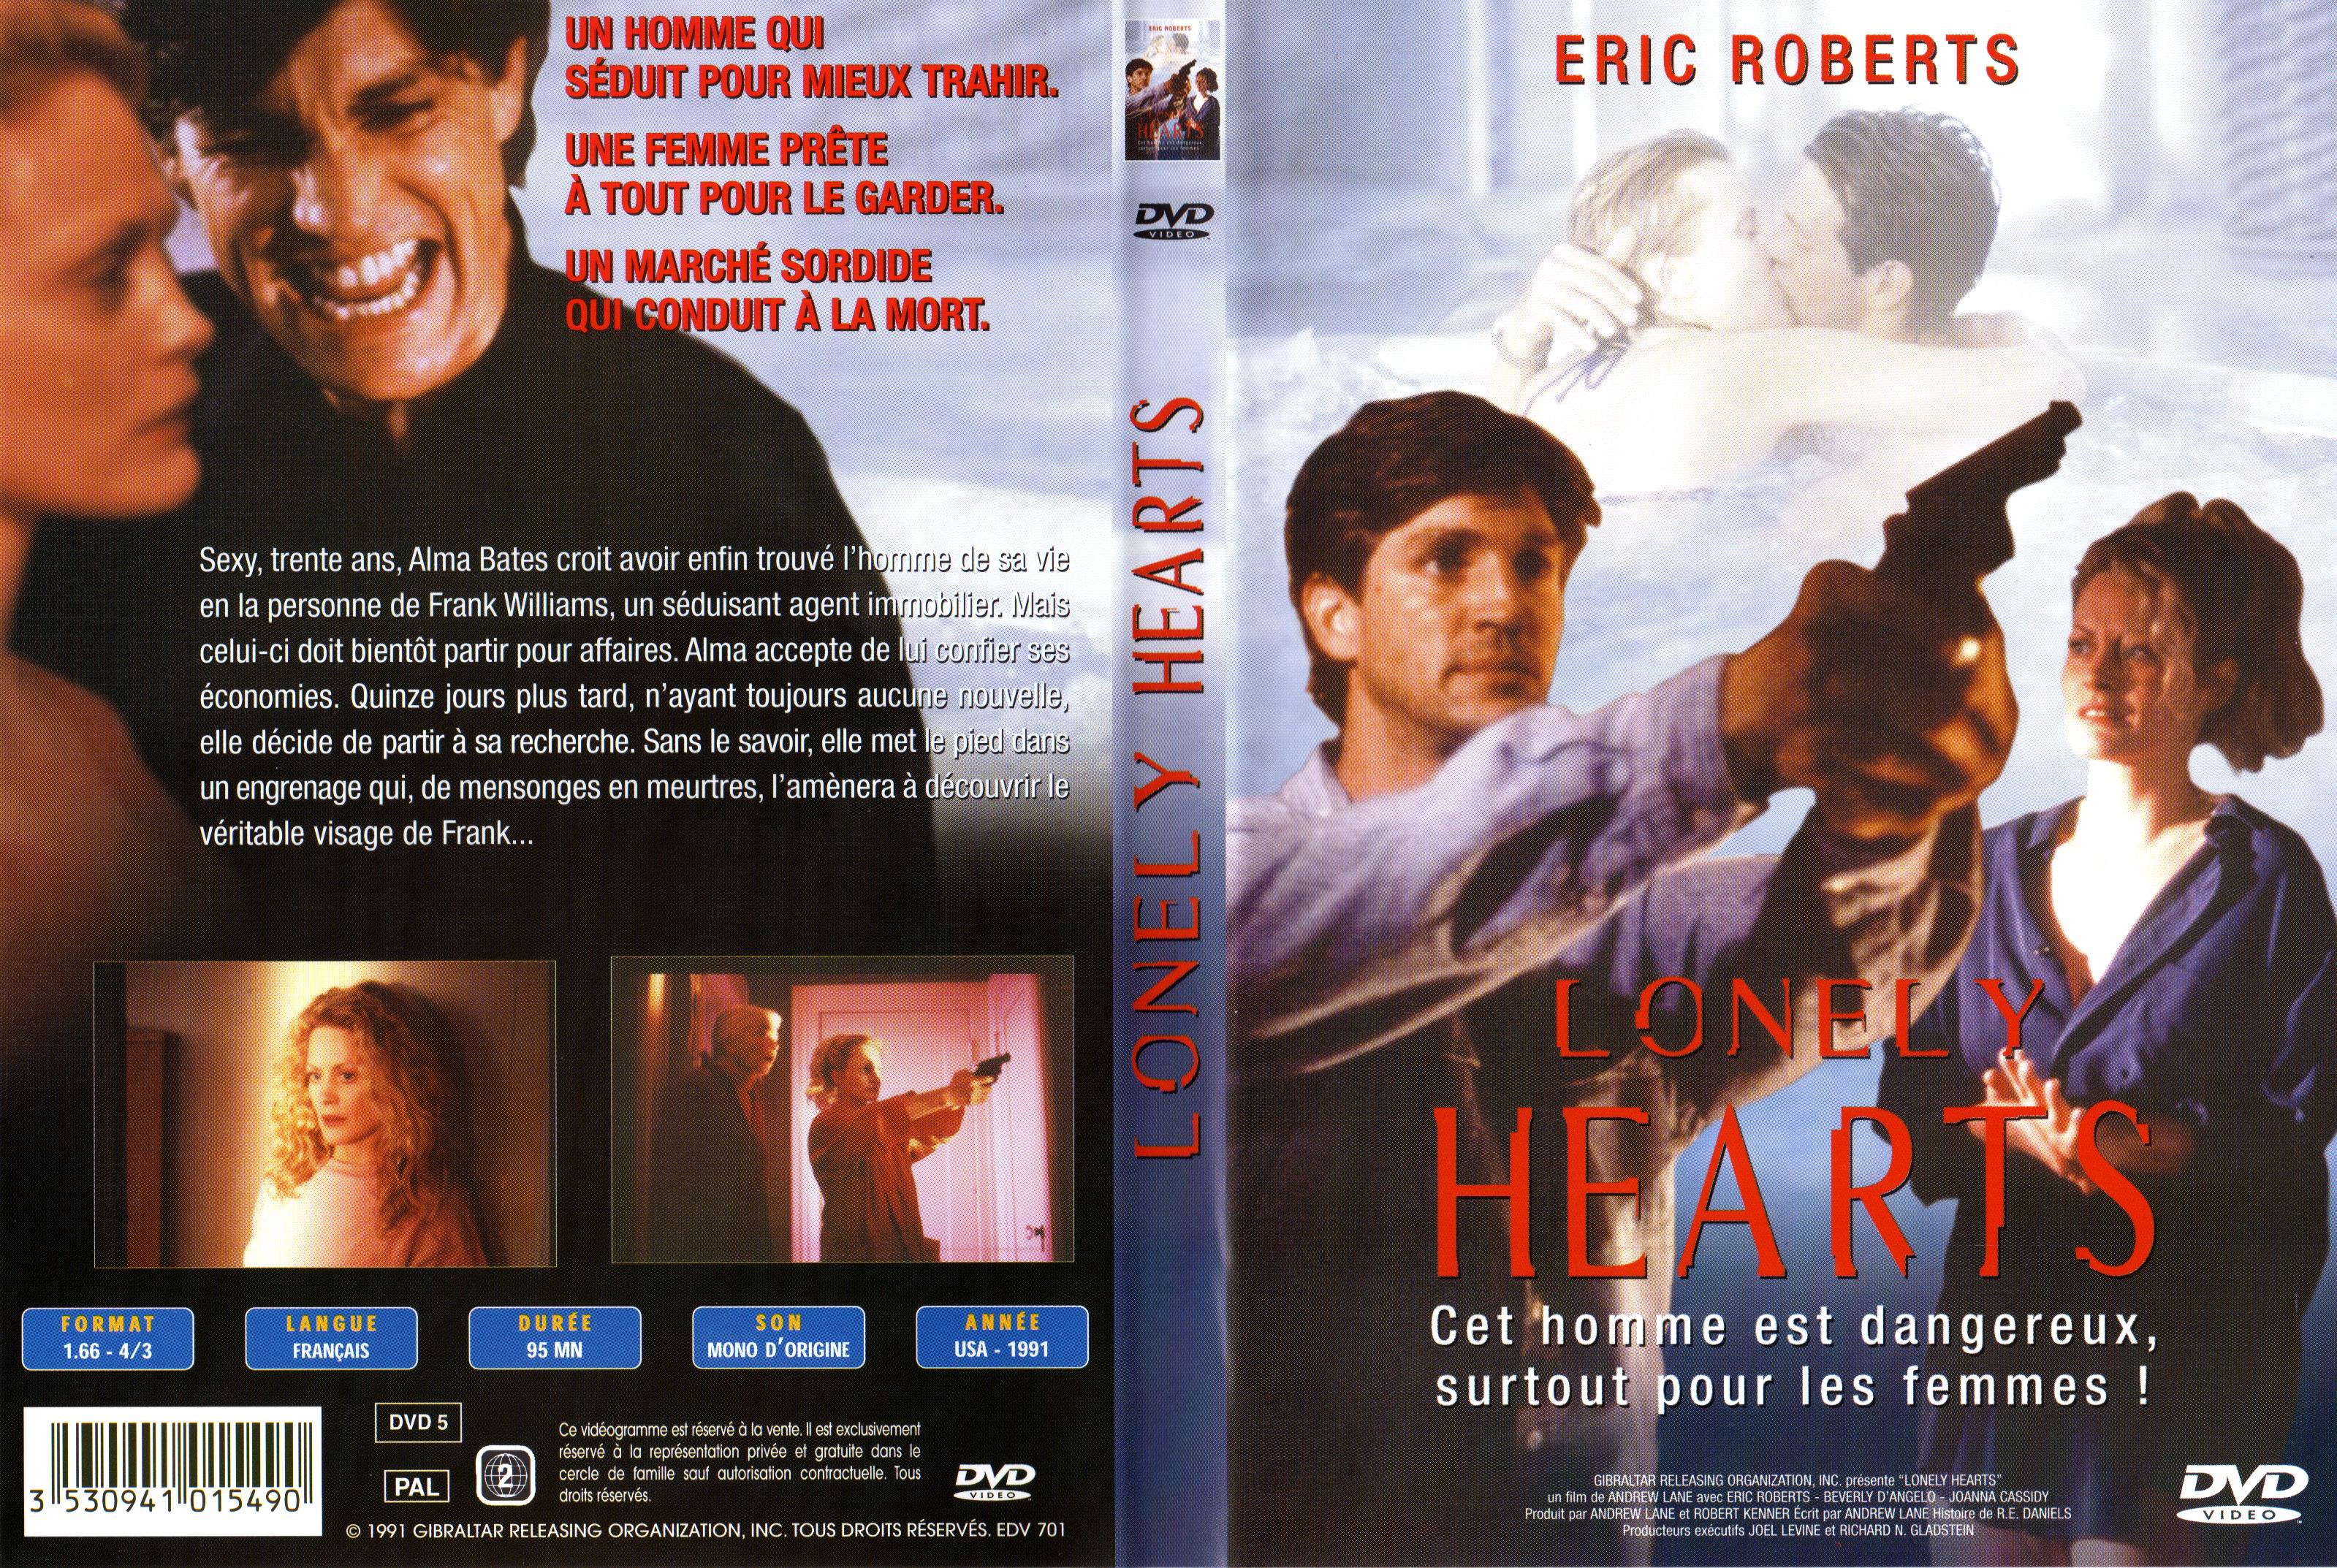 Jaquette DVD Lonely hearts